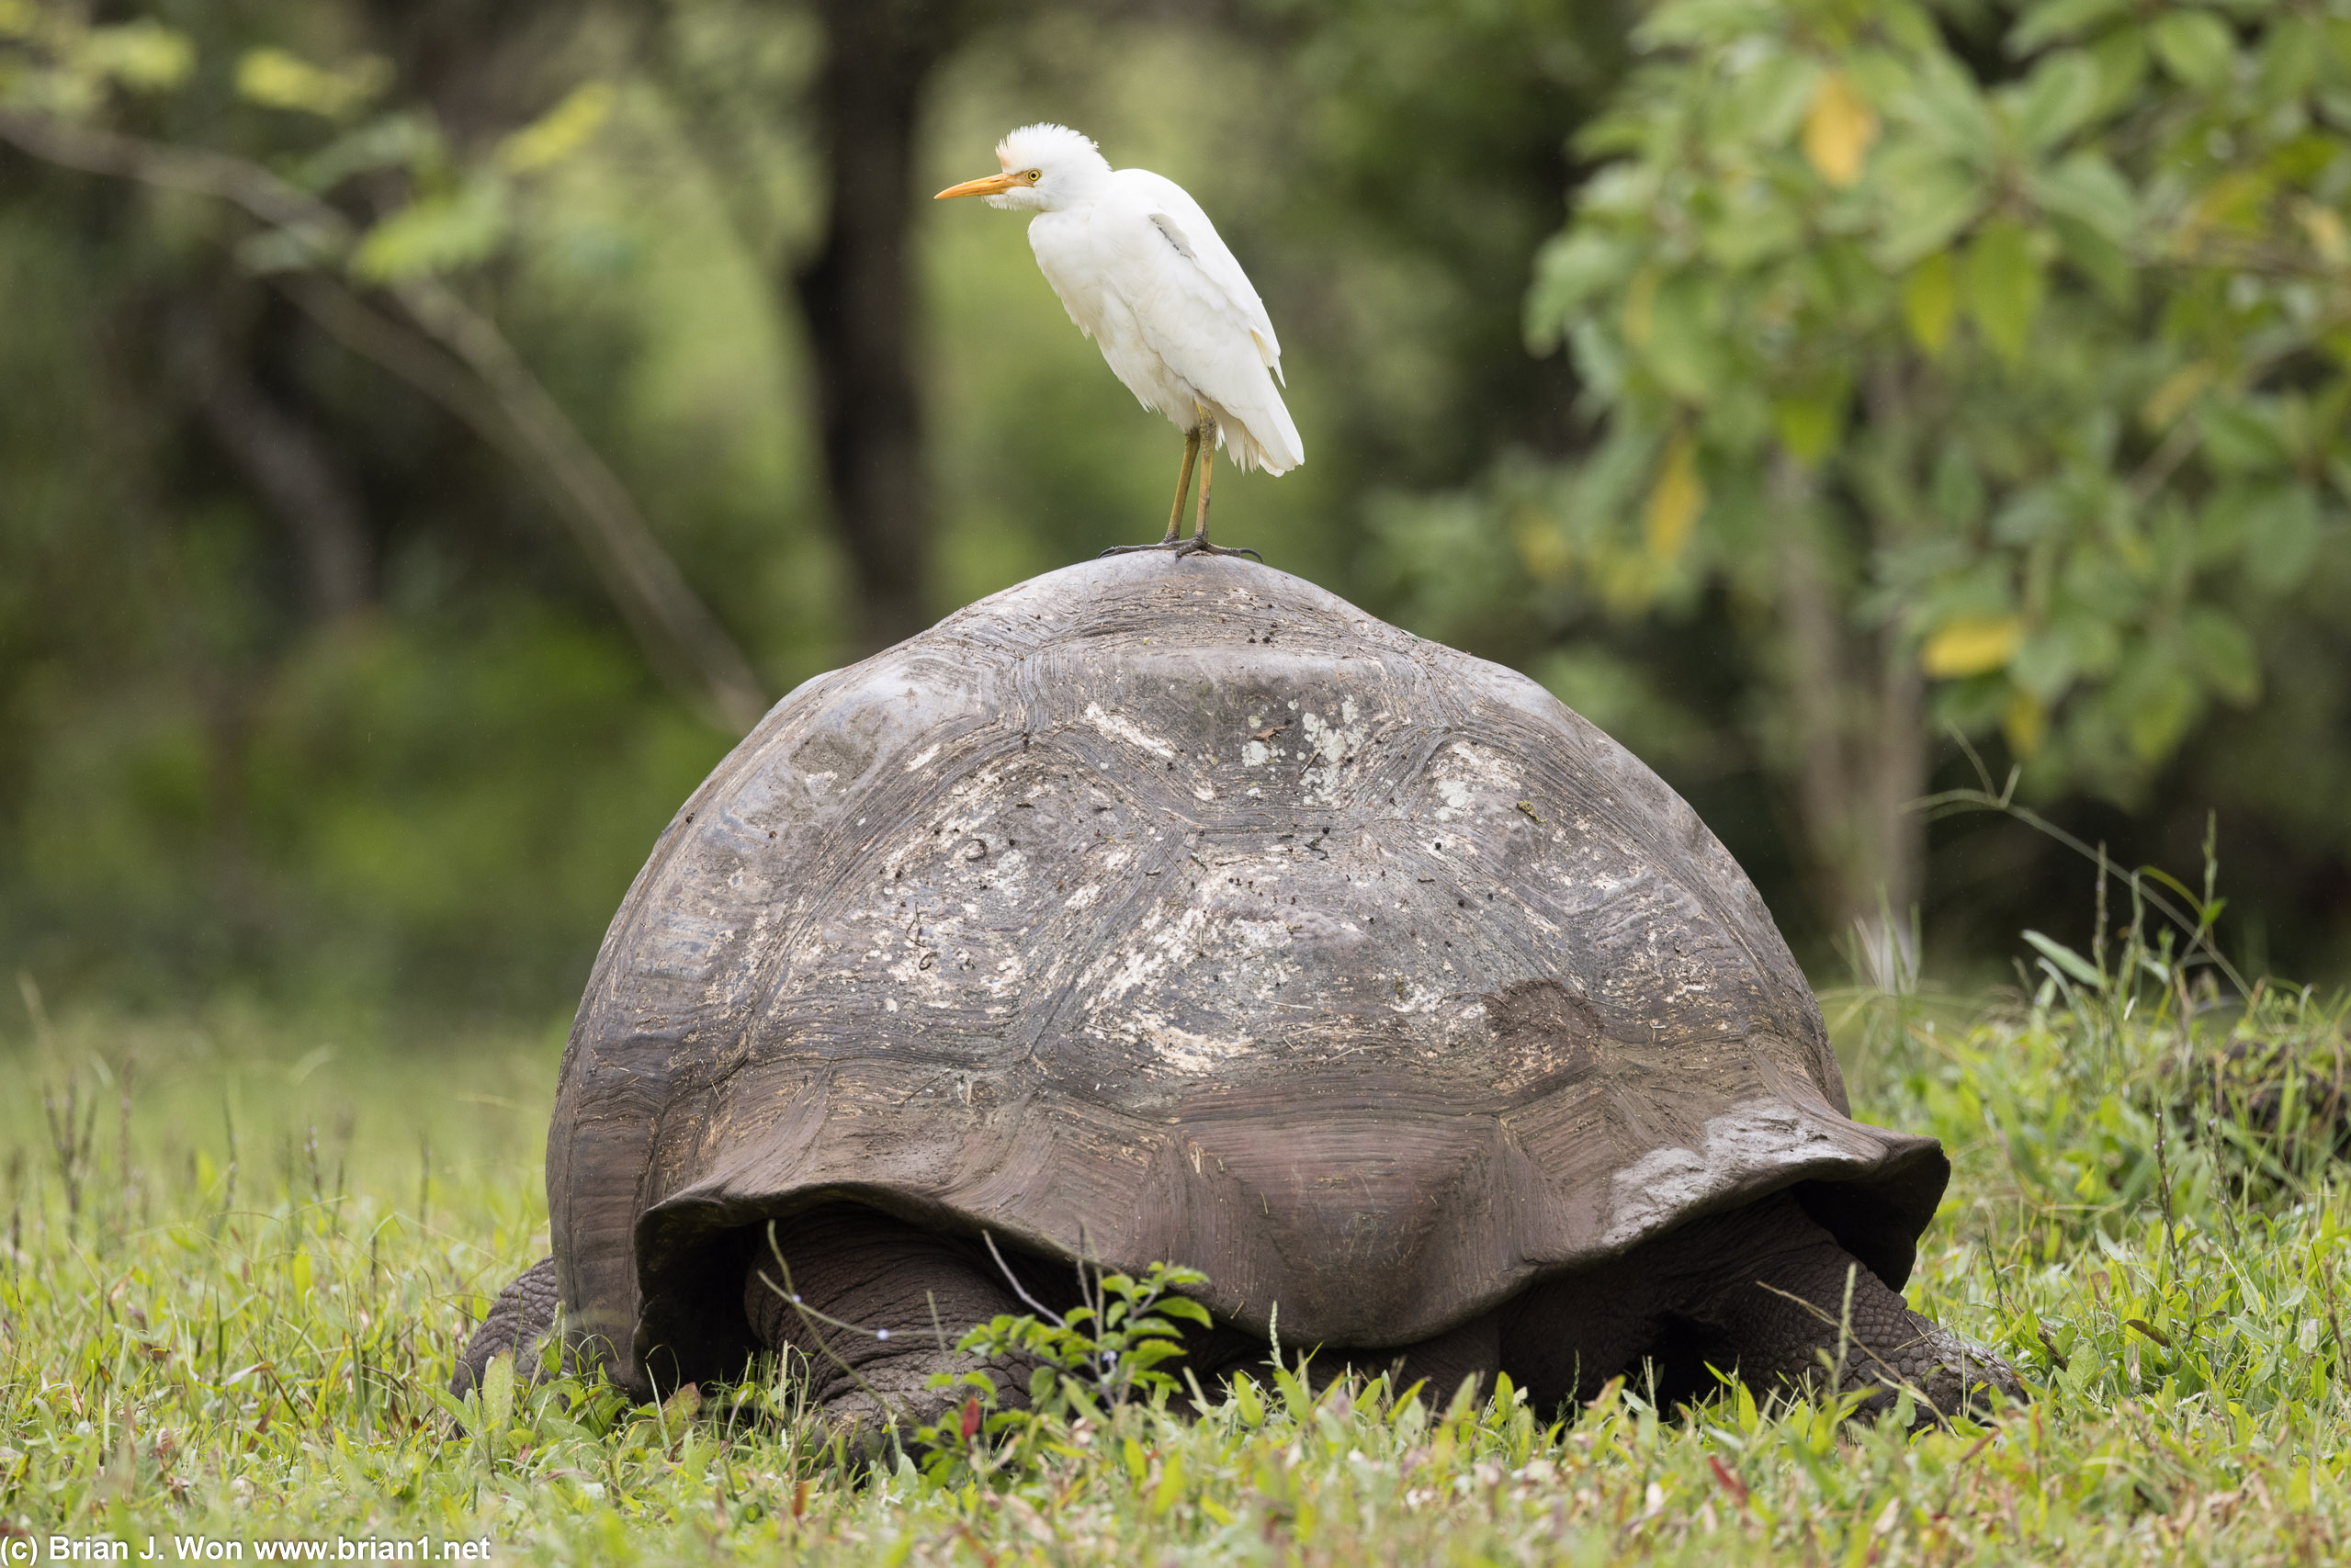 No clue what kind of bird this is, but s/he's perched atop a giant tortoise.